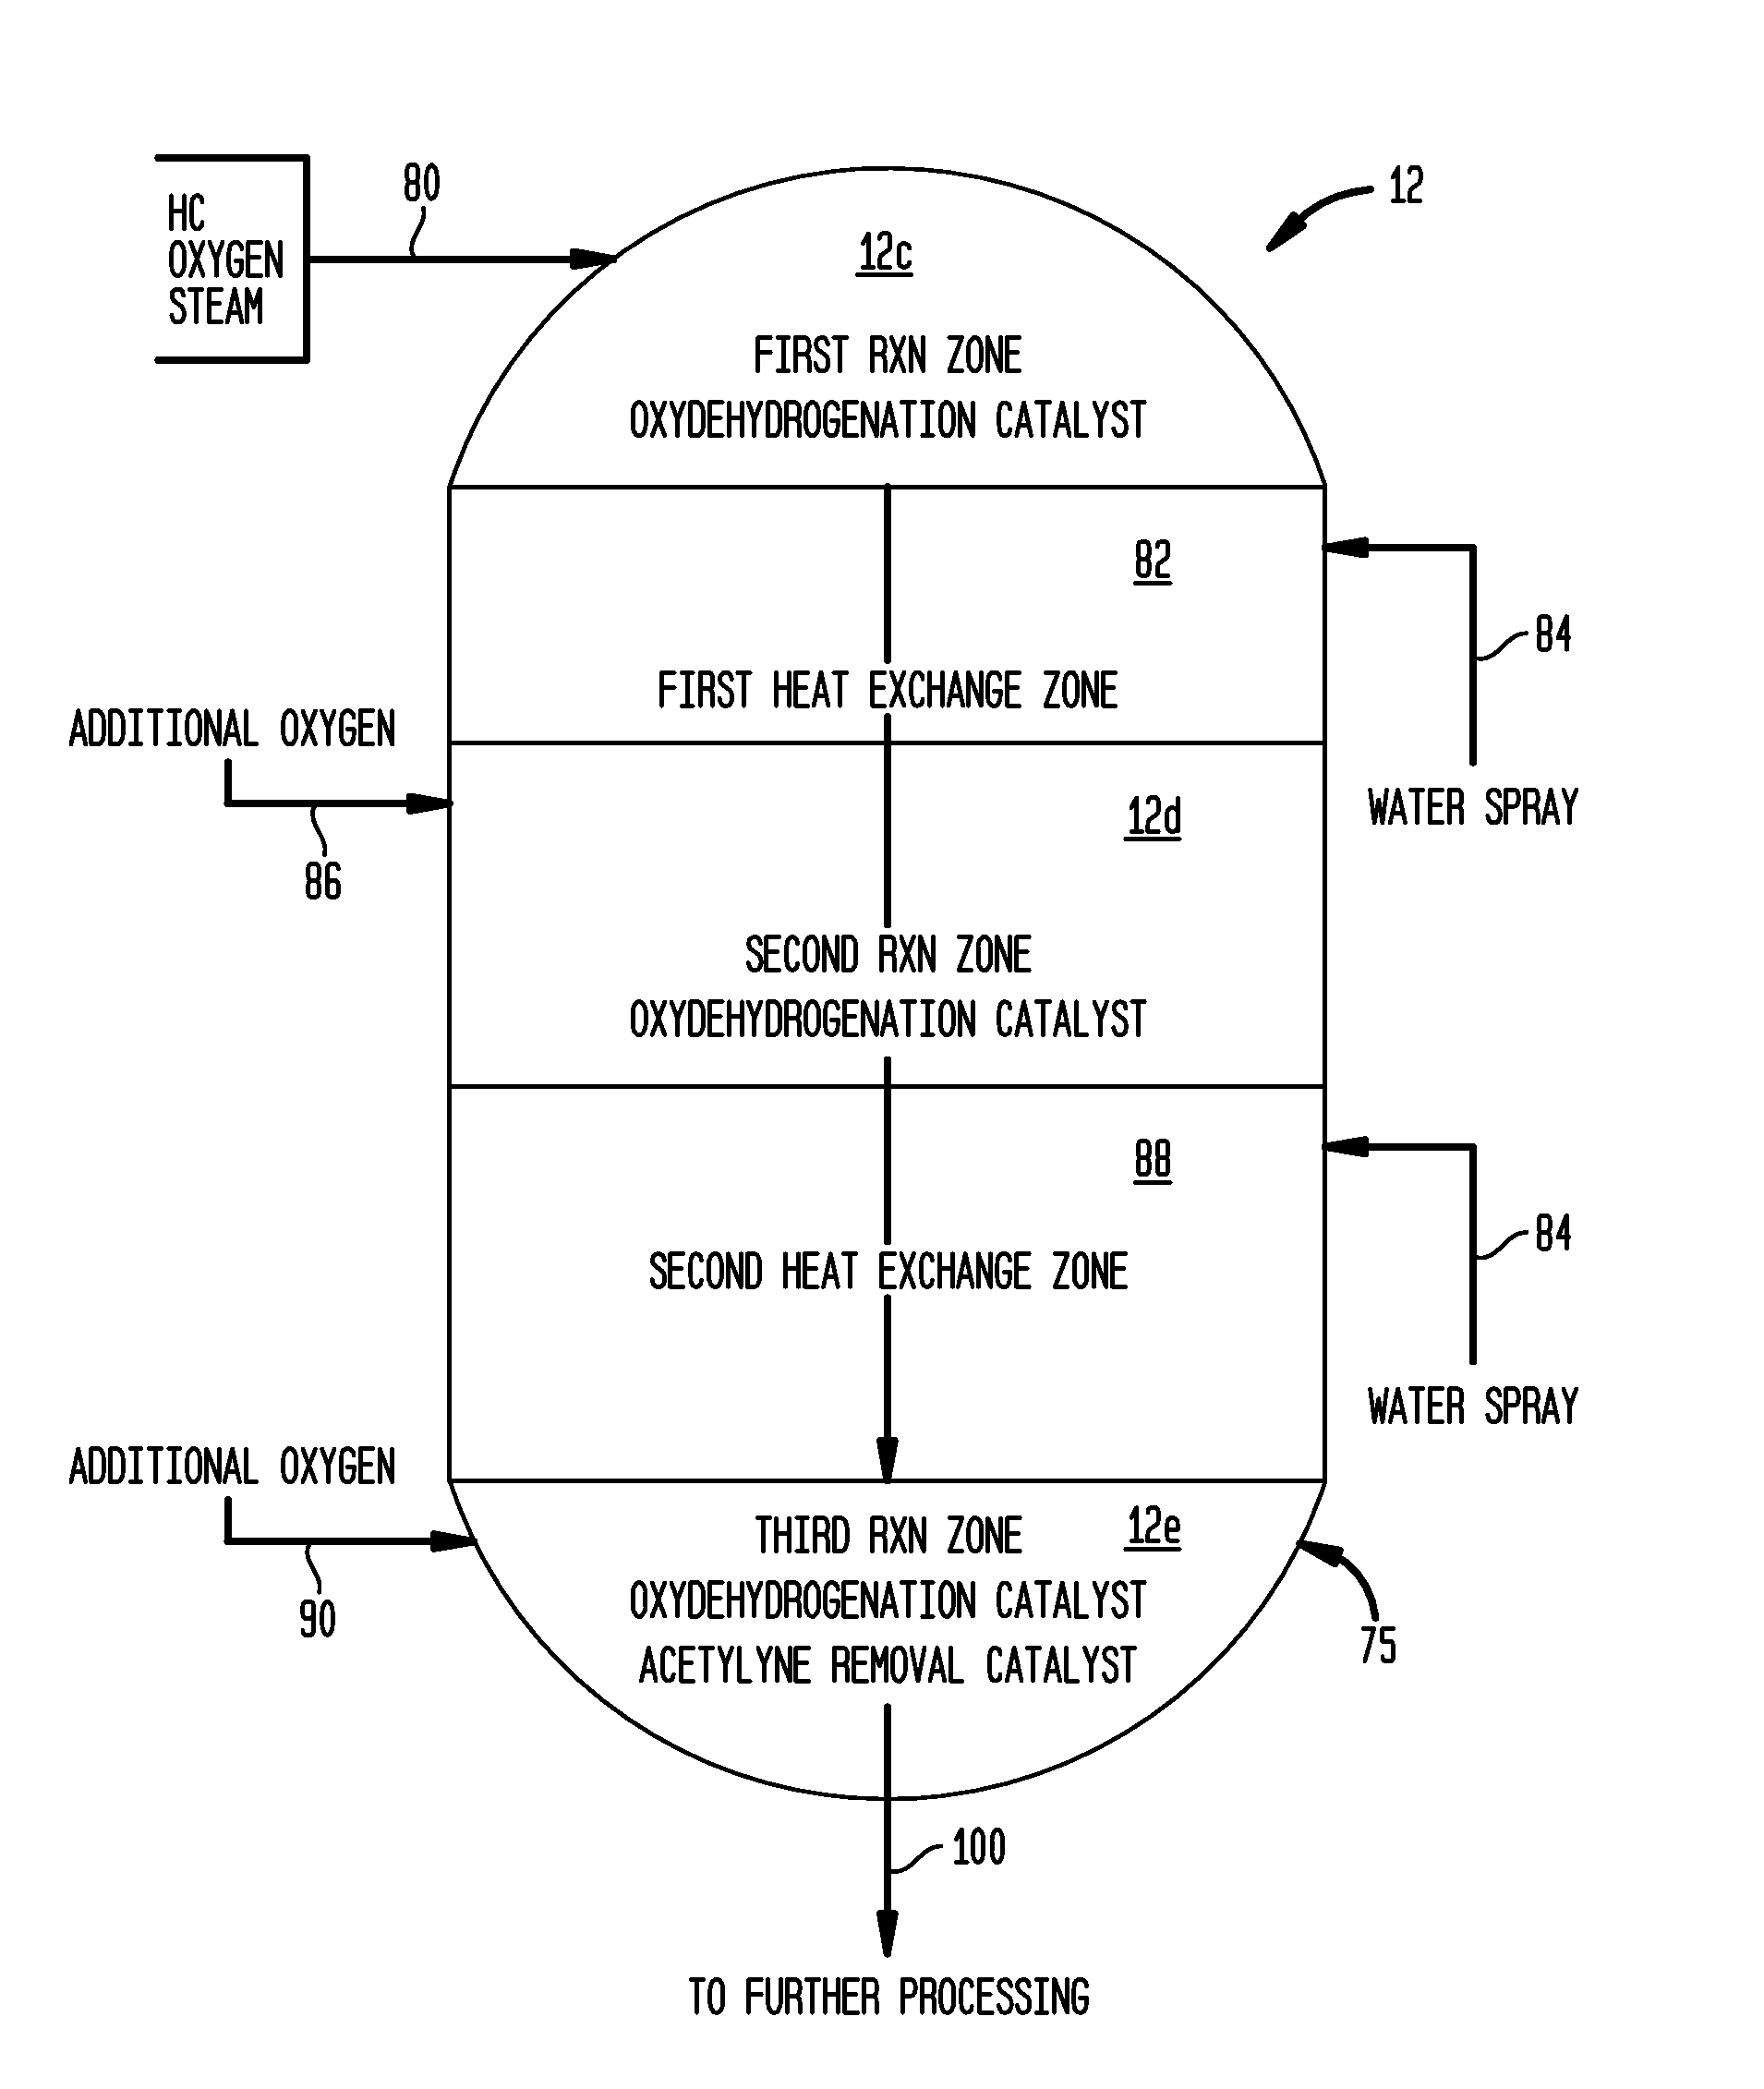 Multi-Stage Oxidative Dehydrogenation Process with Inter-Stage Cooling